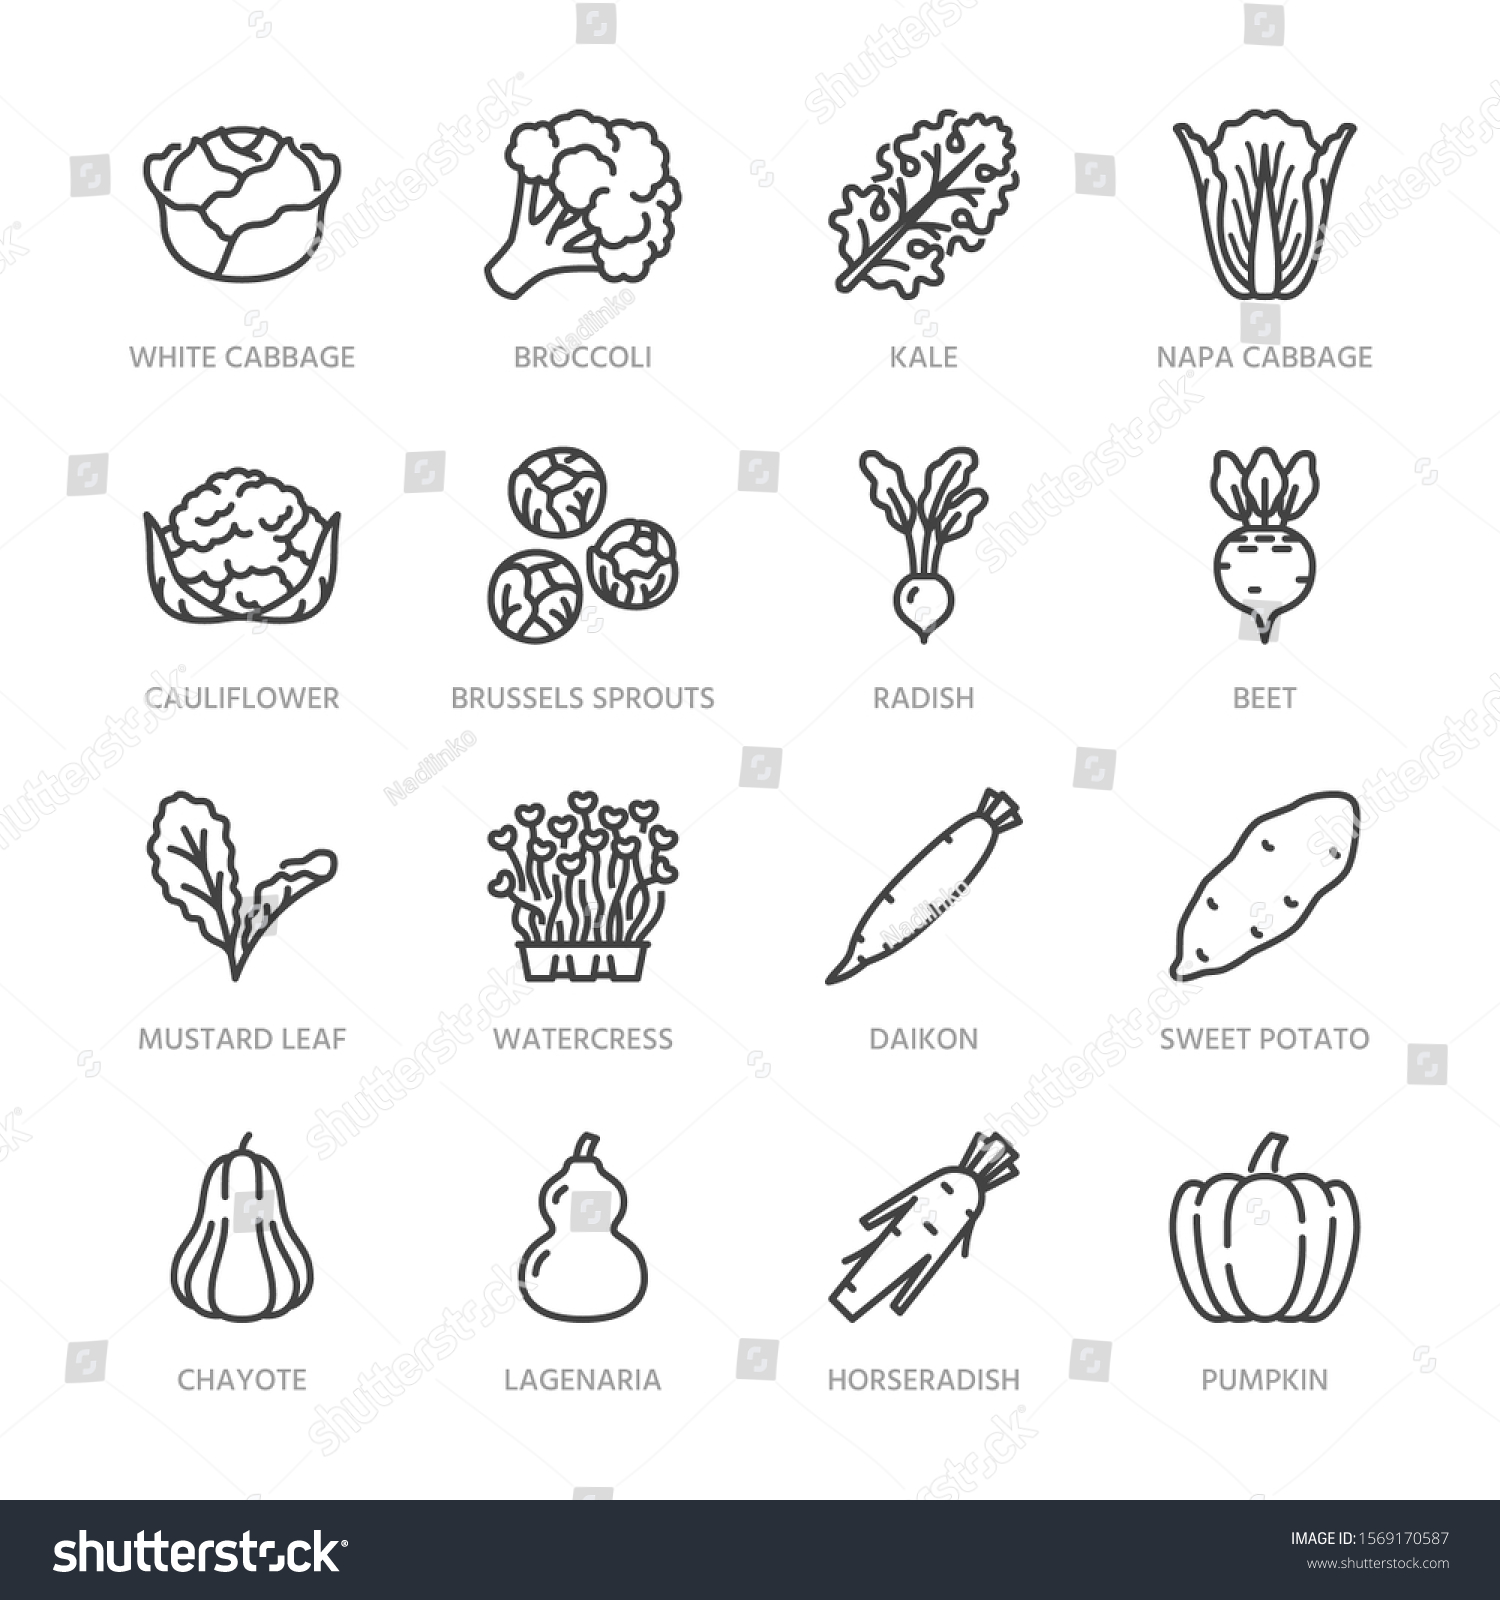 Cabbage vegetables flat line icons set. Kale, broccoli, cauliflower, brussels sprouts, radish daikon beetroot vector illustrations. Outline pictogram food store. Pixel perfect. Editable Strokes. #1569170587